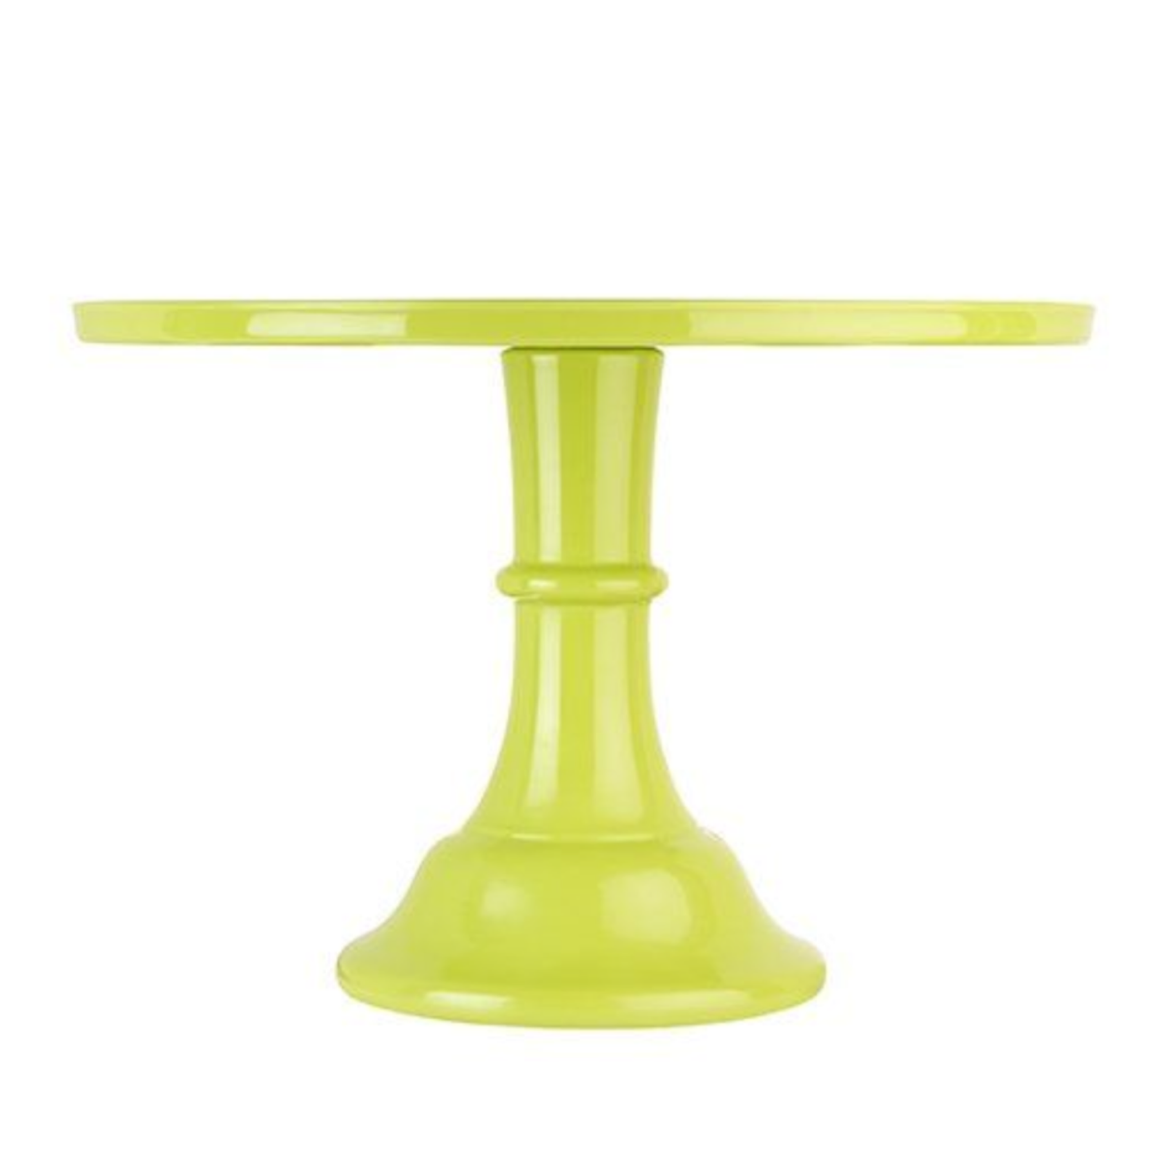 CAKE STAND - GREEN LIME CHARTREUSE MELAMINE